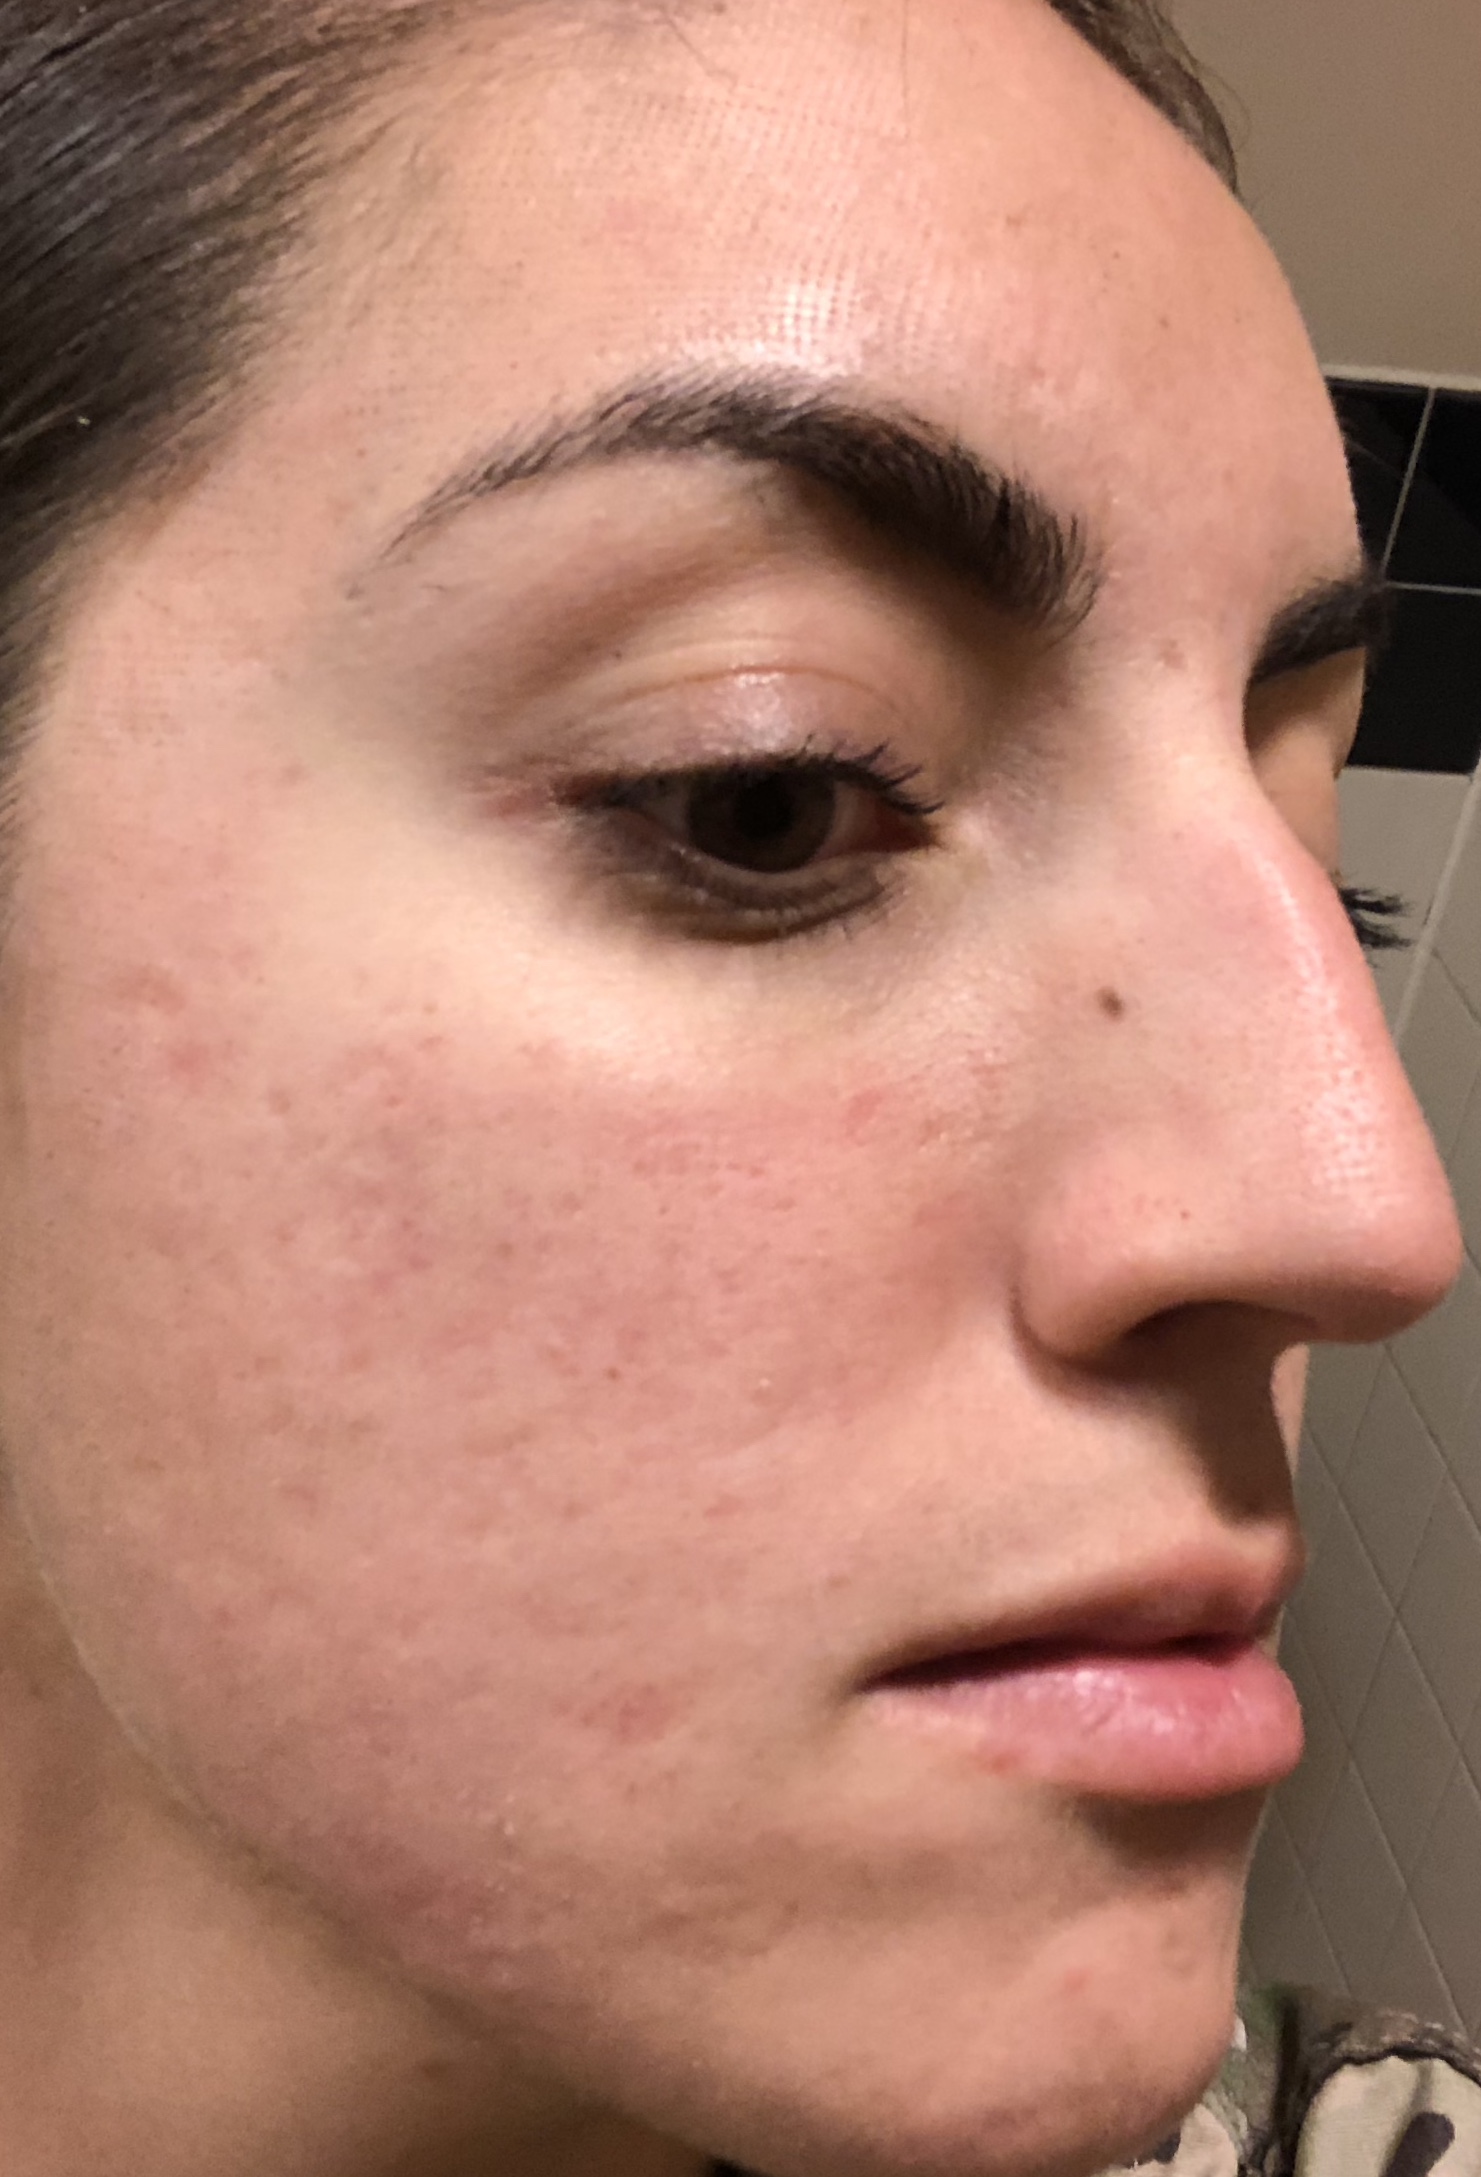 Acne Scar Removal Journey: A 5 month photo journal - Along Came Alex